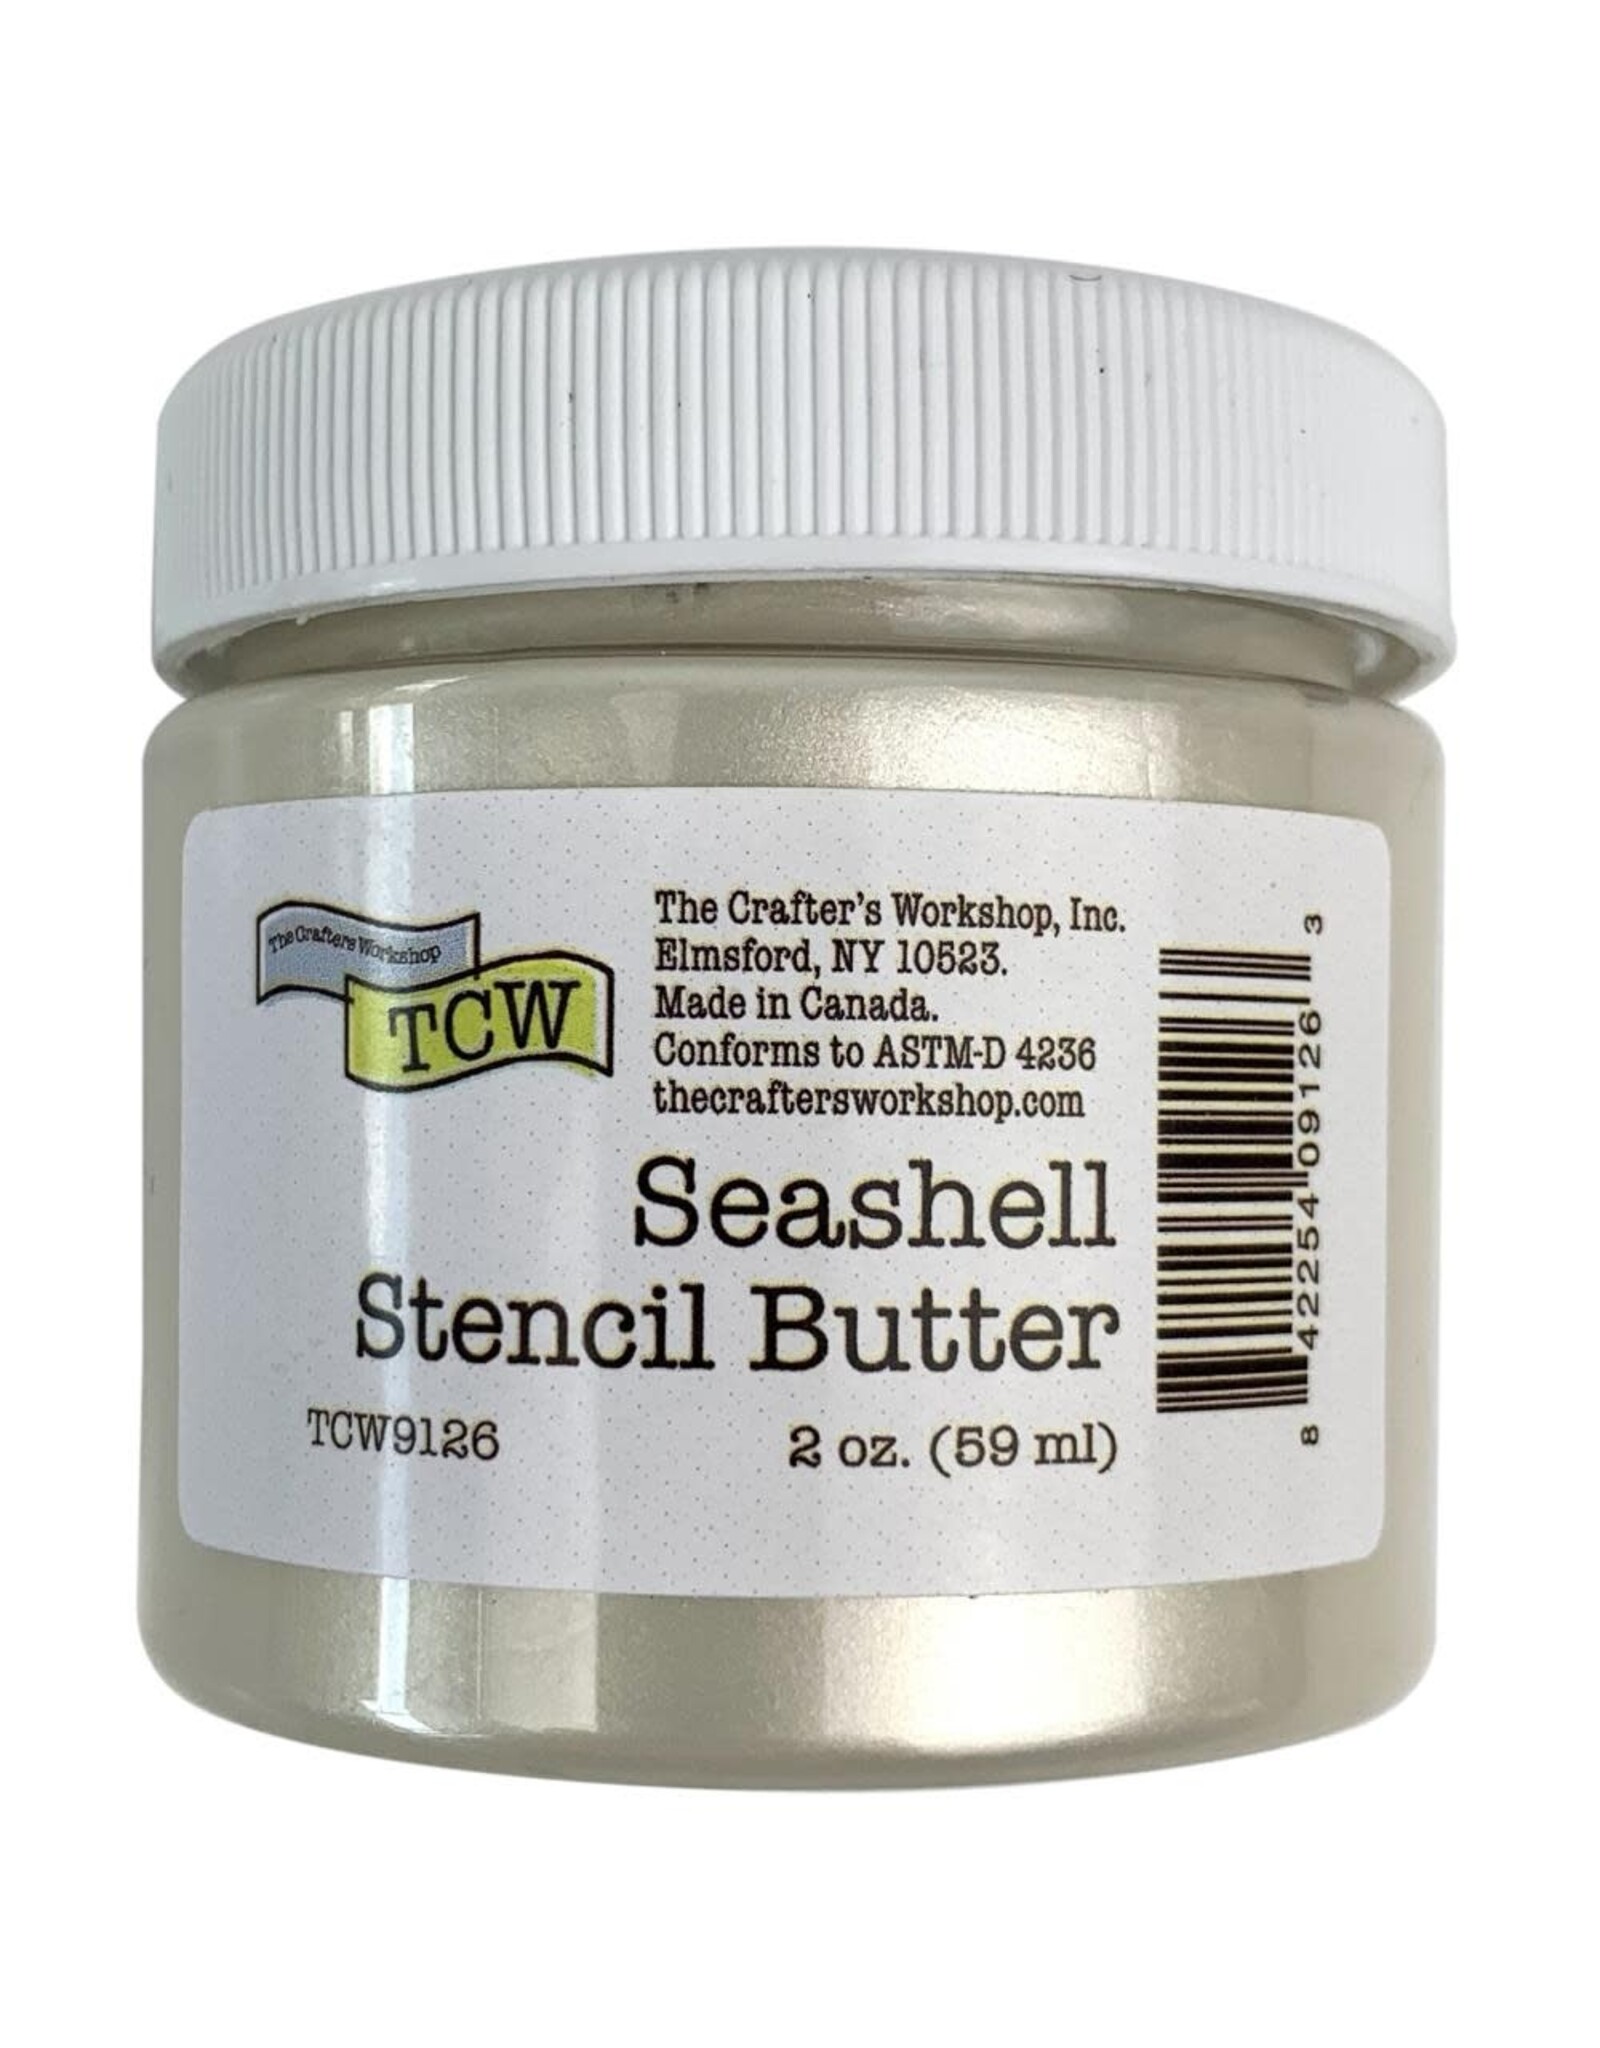 CRAFTERS WORKSHOP THE CRAFTERS WORKSHOP SEASHELL STENCIL BUTTER 2oz